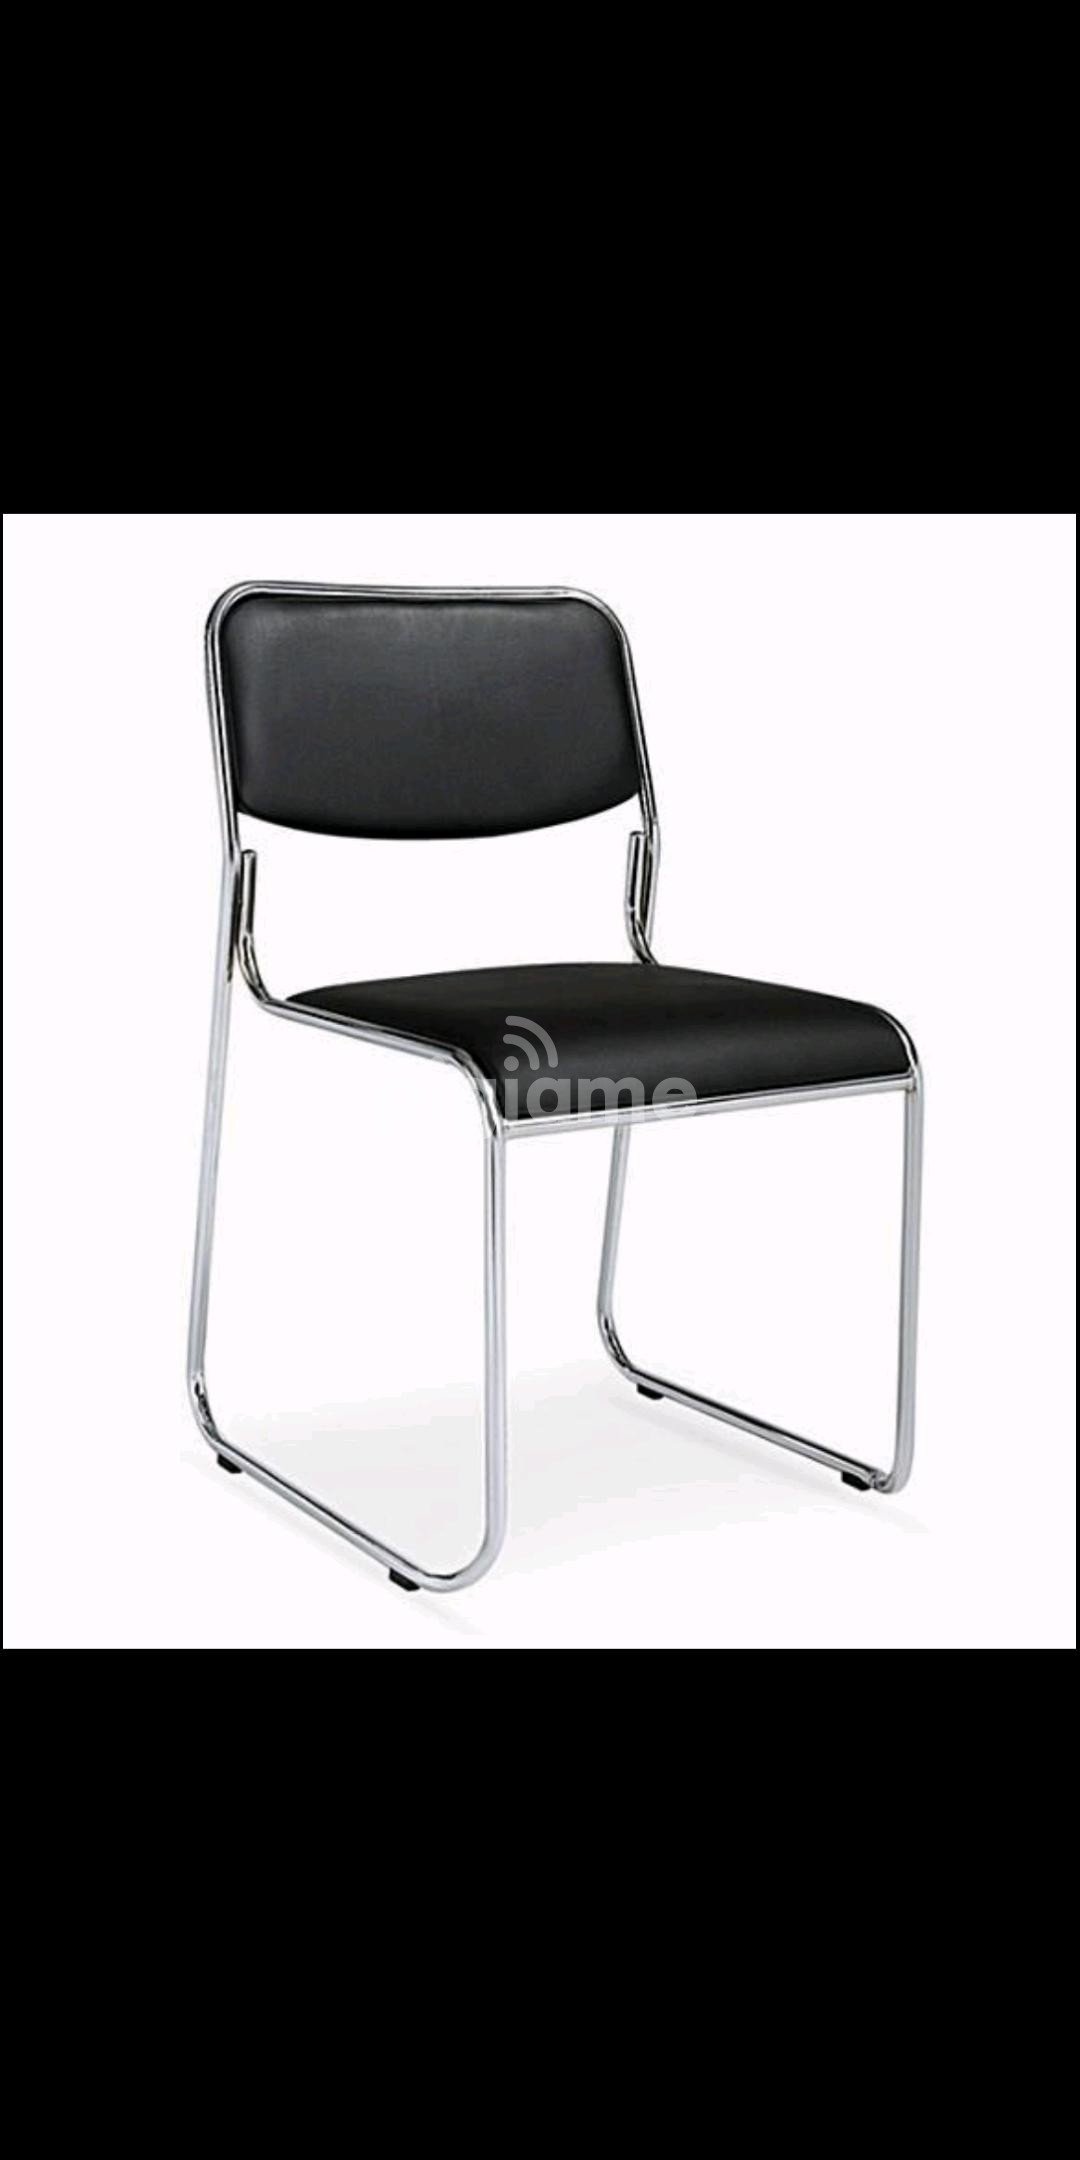 new waiting chair without wheels on at ksh 3500